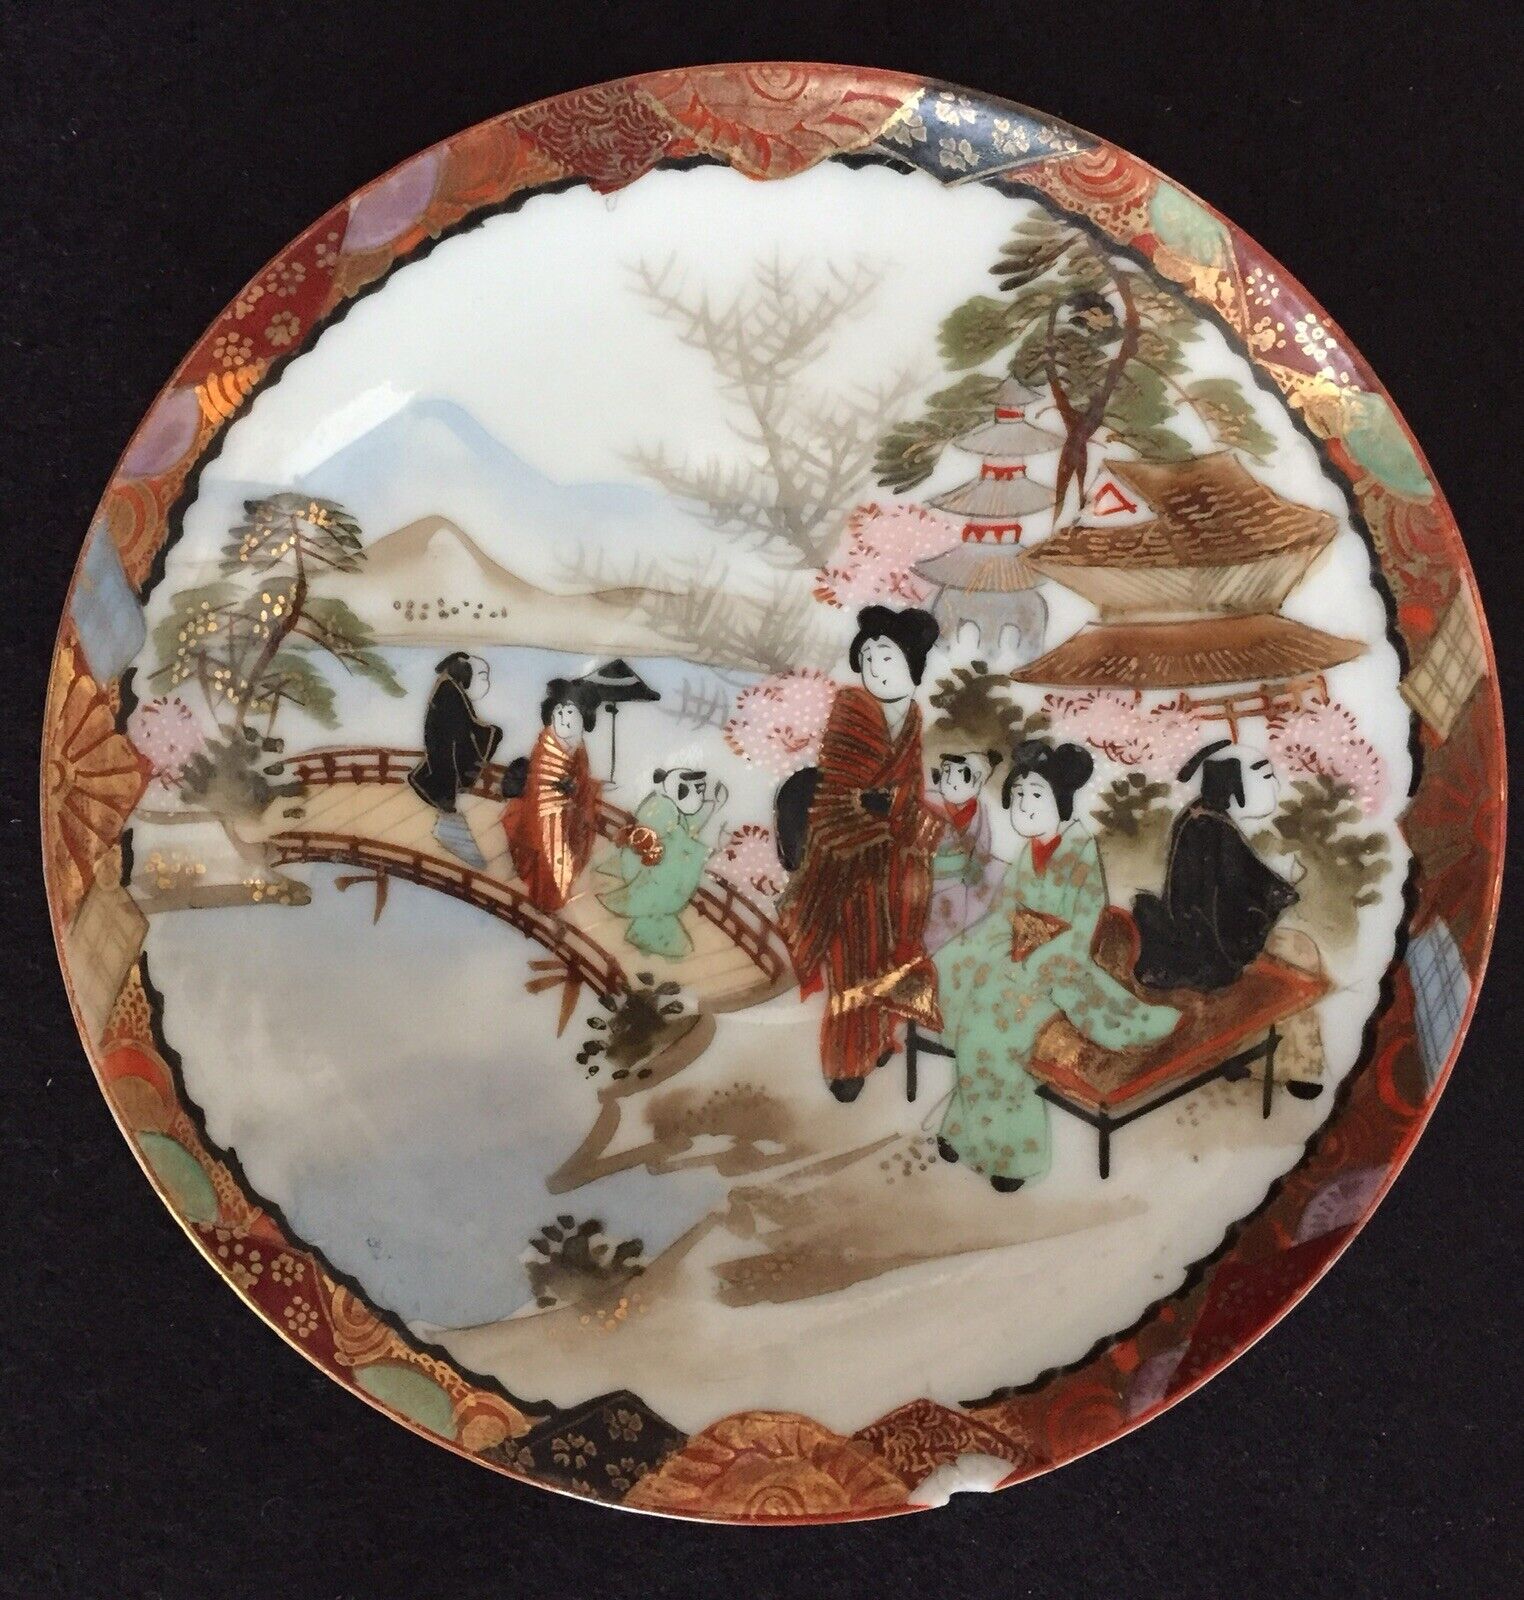 Small Antique Figural Plate Dish Japanese Chinese Famille rose Porcelain 19th C